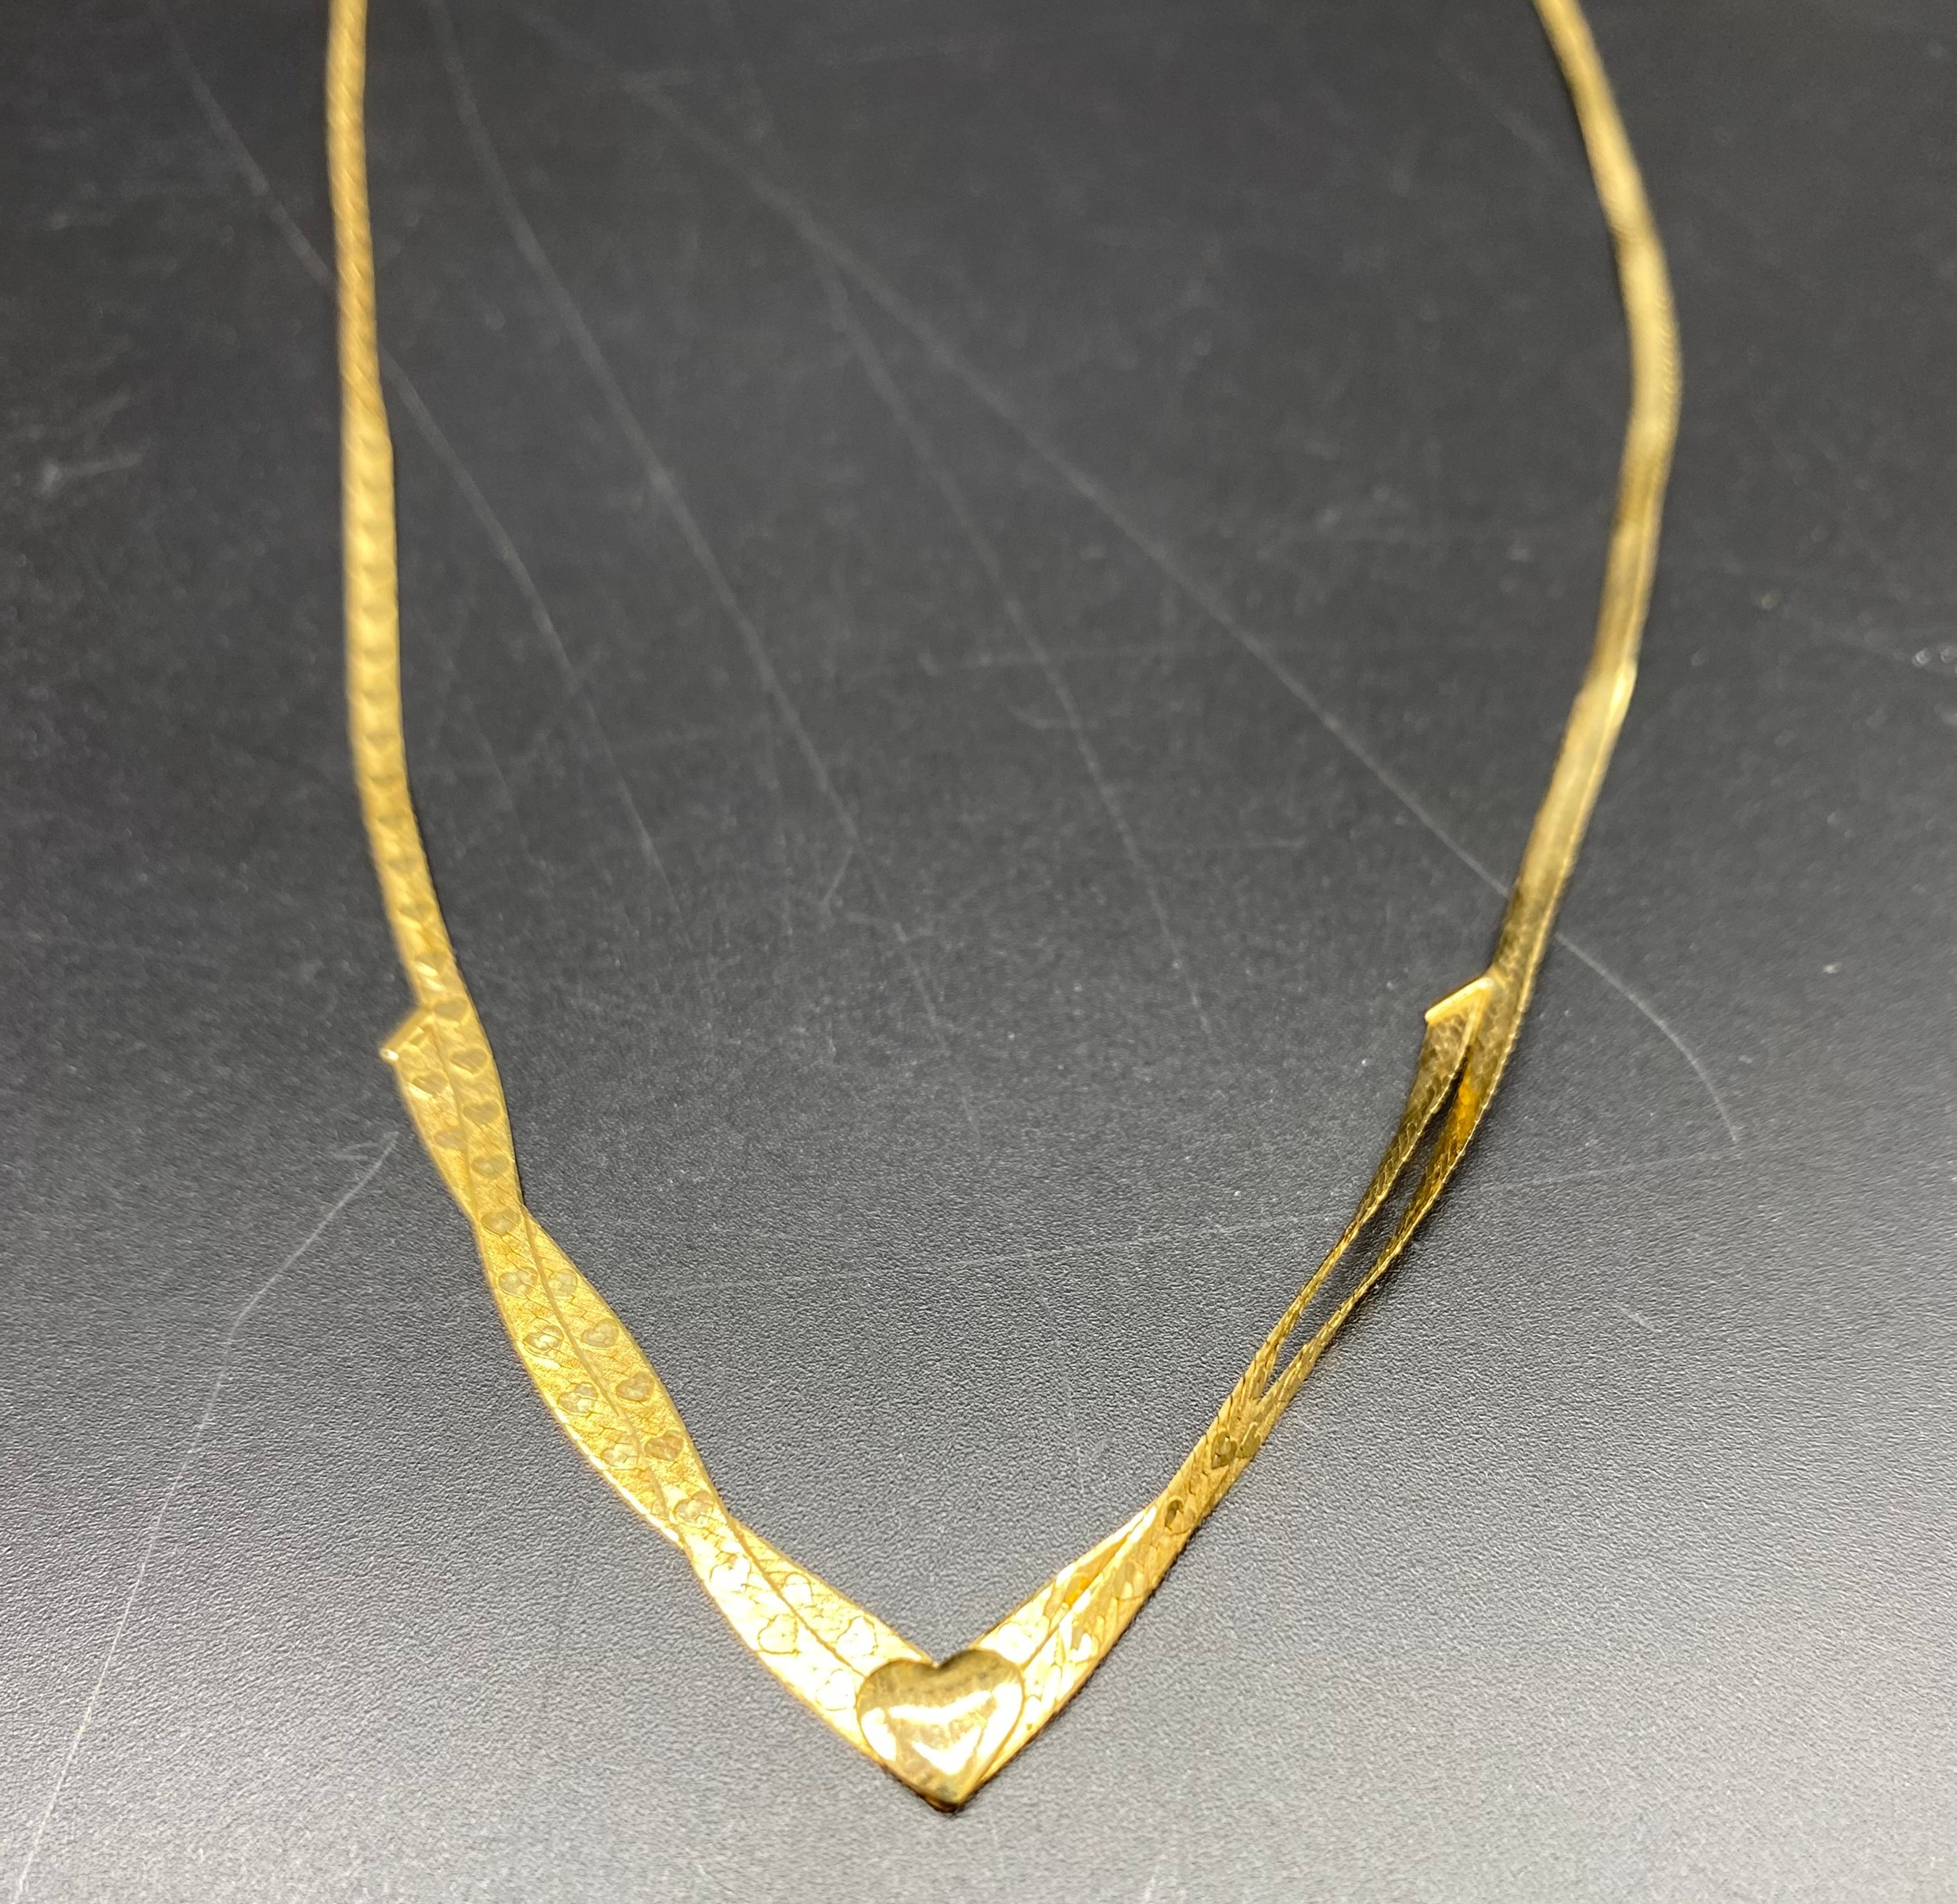 Two 9ct gold 375 hallmarked snake chain necklaces [5.77 Grams] - Image 4 of 6